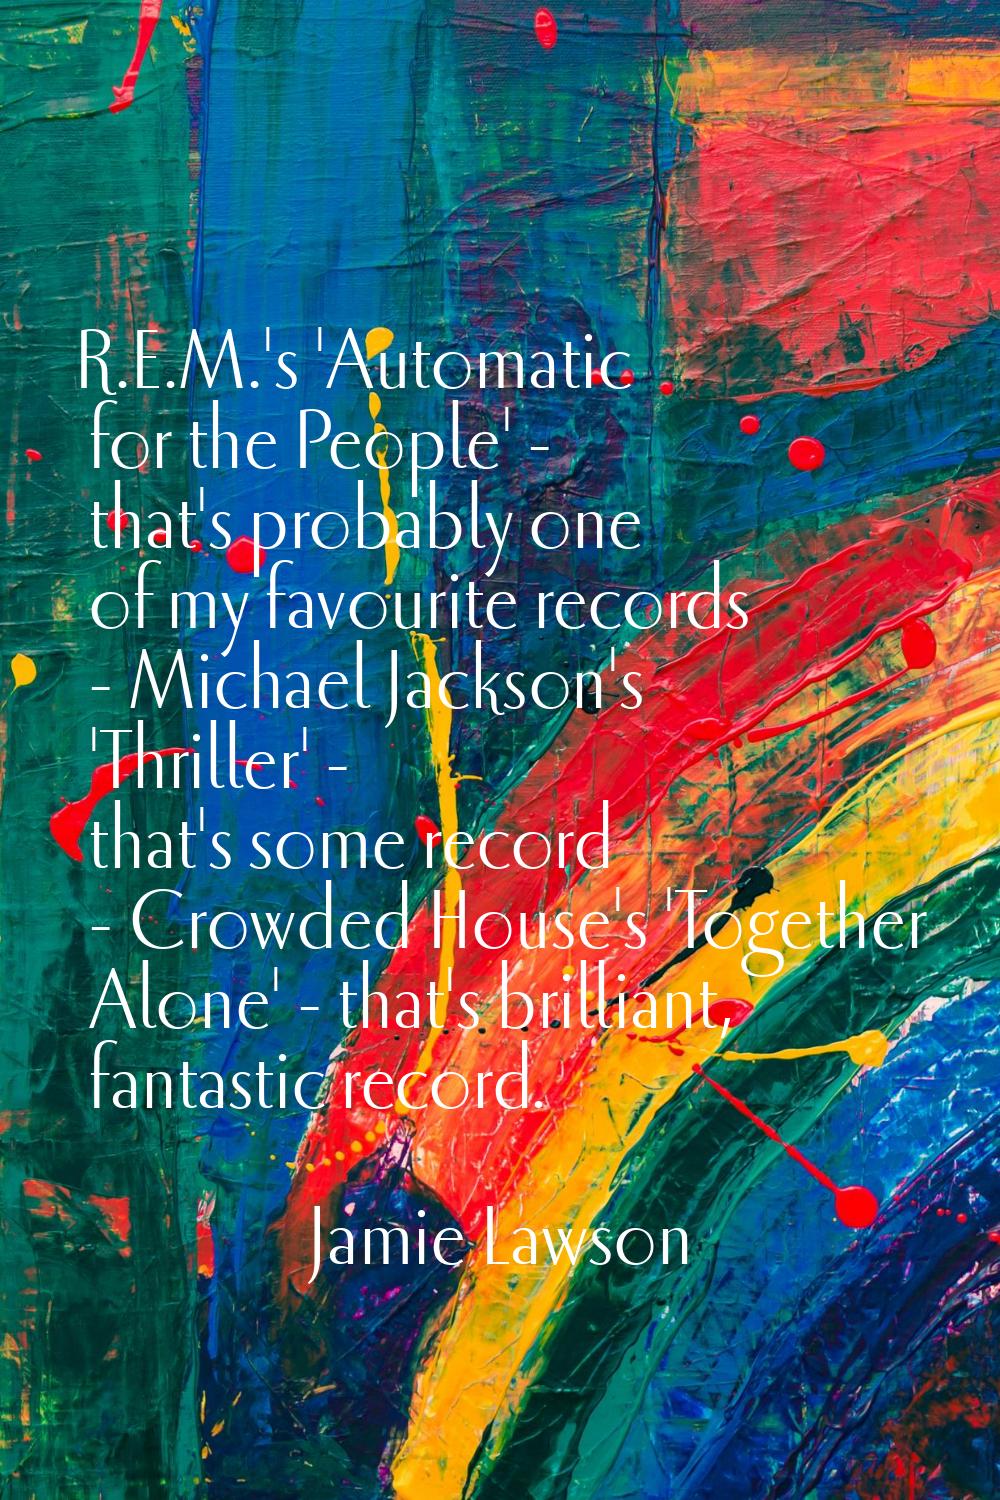 R.E.M.'s 'Automatic for the People' - that's probably one of my favourite records - Michael Jackson